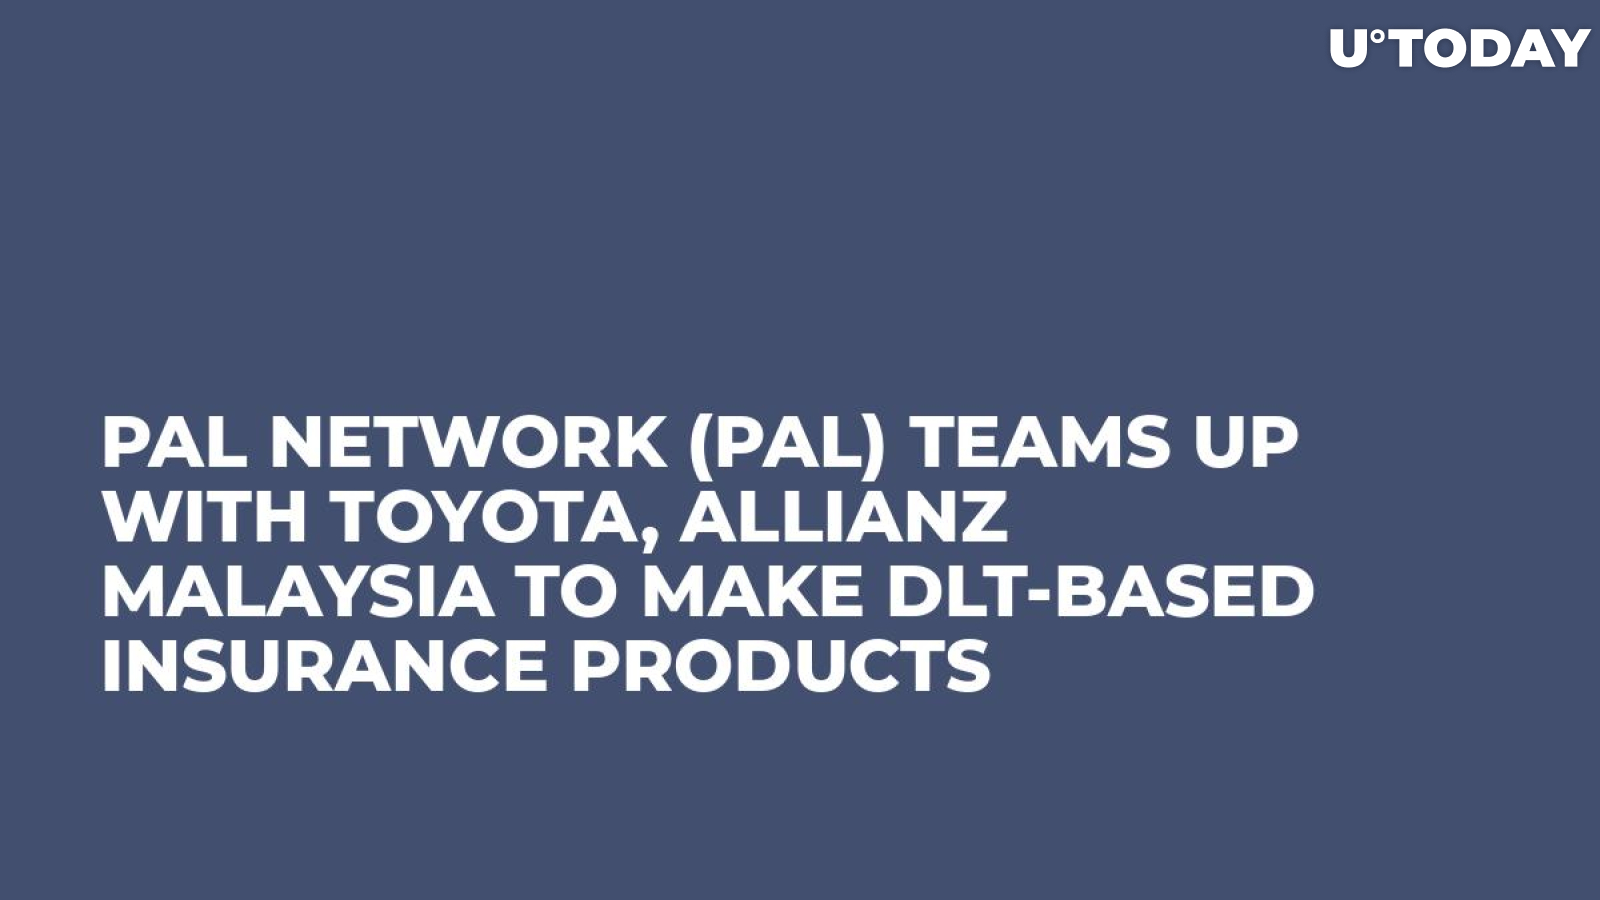 PAL Network (PAL) Teams Up with Toyota, Allianz Malaysia to Make DLT-Based Insurance Products